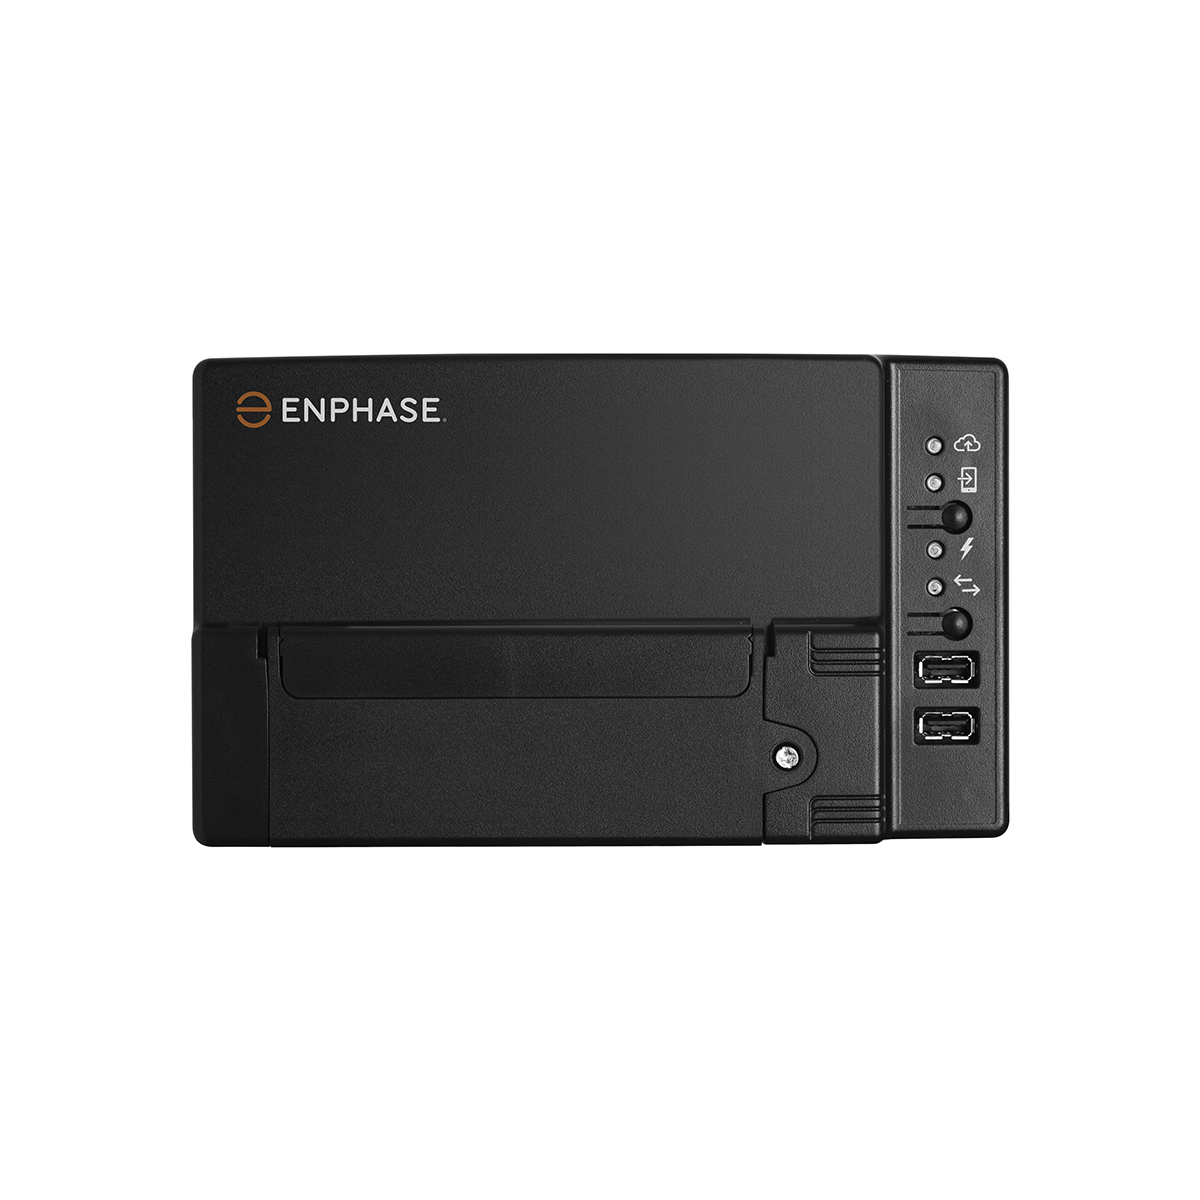 29x Sunpower P6 11745 wp met Enphase IQ8A en Accu 1x N Charge 10T,1 x N Charge 3T